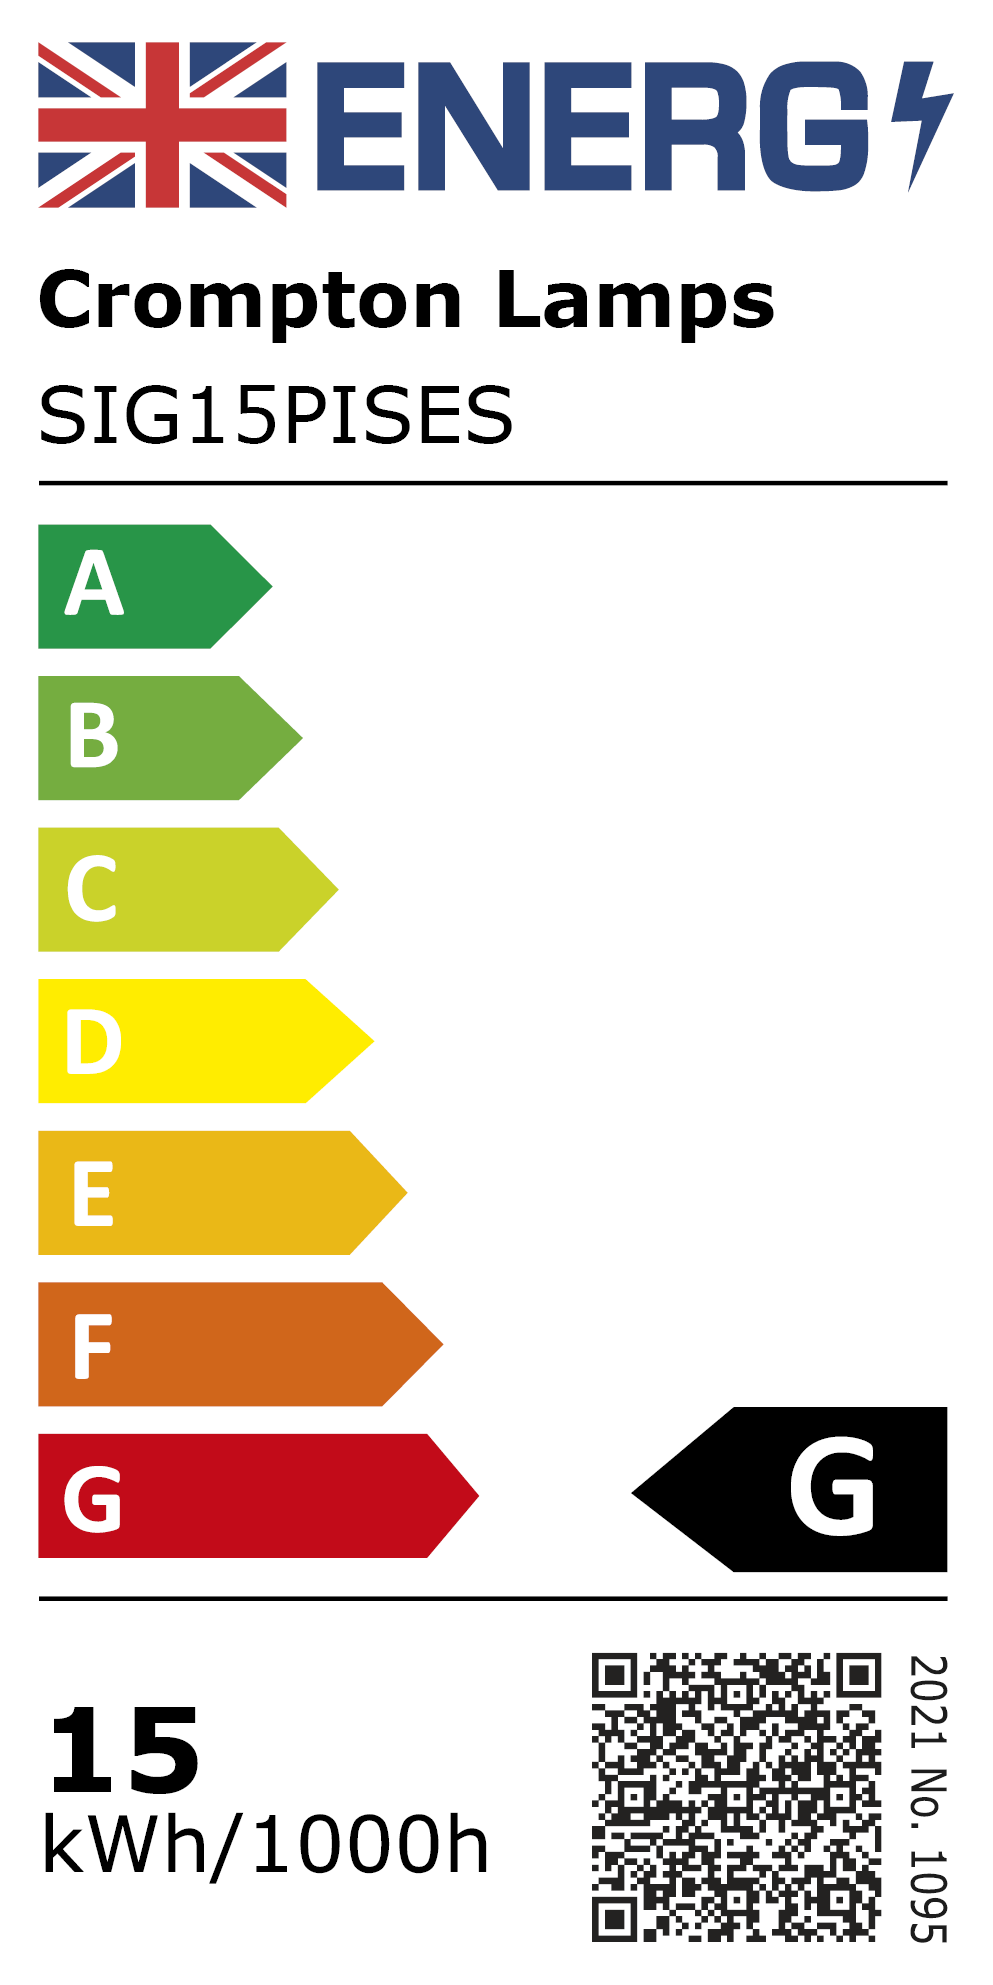 New 2021 Energy Rating Label: Stock Code SIG15PISES